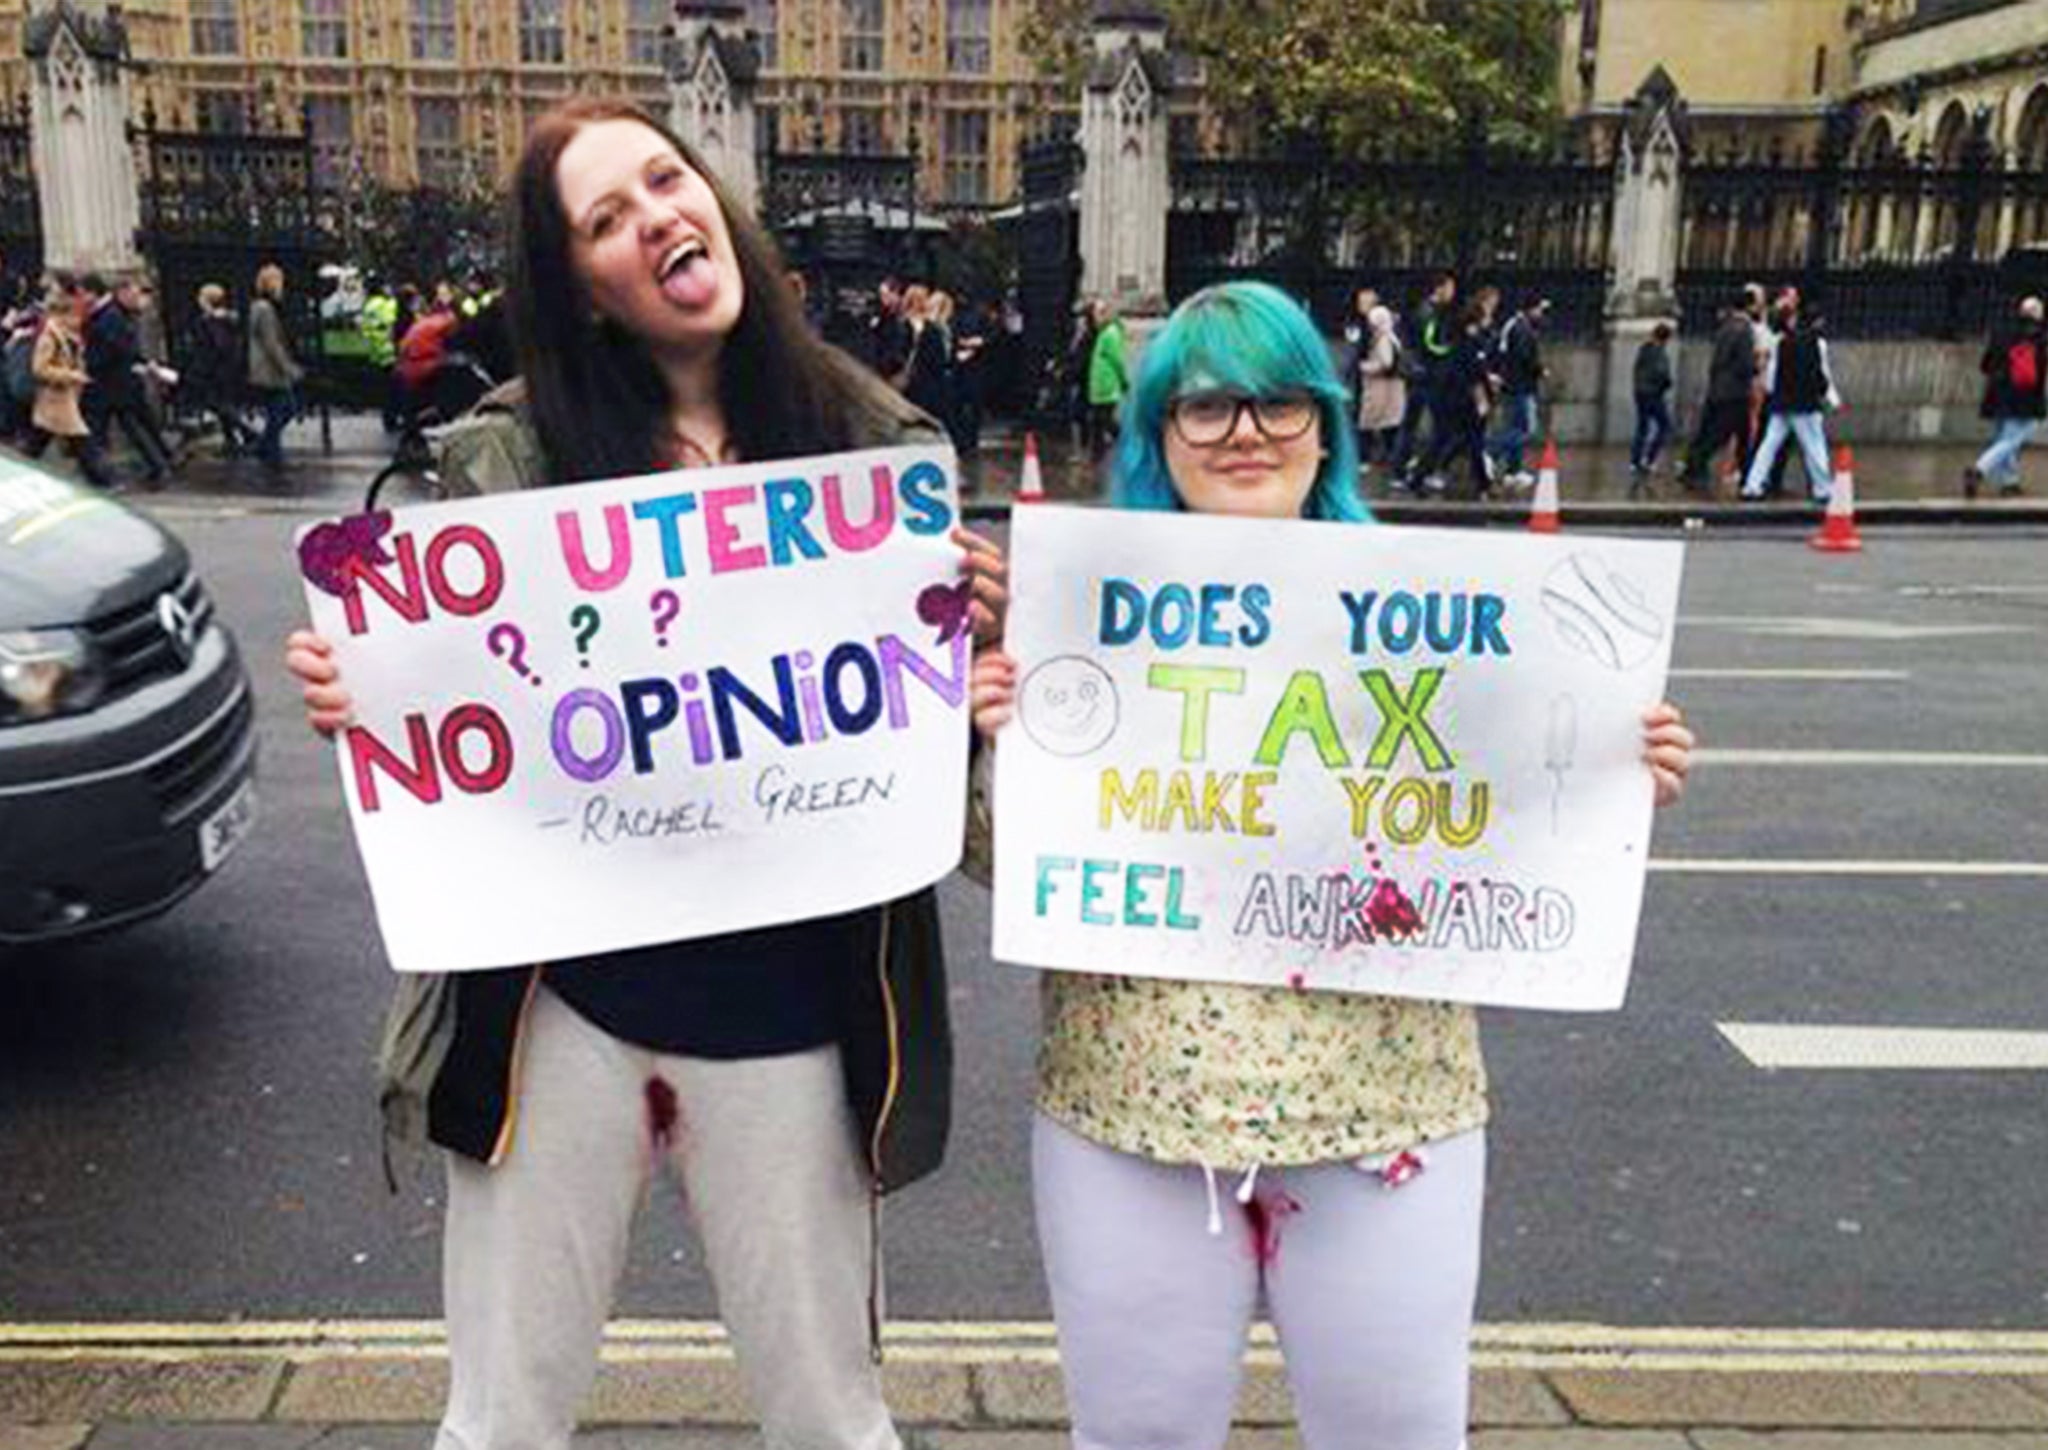 "We're not naive. We know the Government can only do so much as the tampon tax is covered under EU law. But soon, something is bound to give." Charlie Edge (left) and Ruth Howarth (right) during their protest outside Parliament on 6 November, 2015